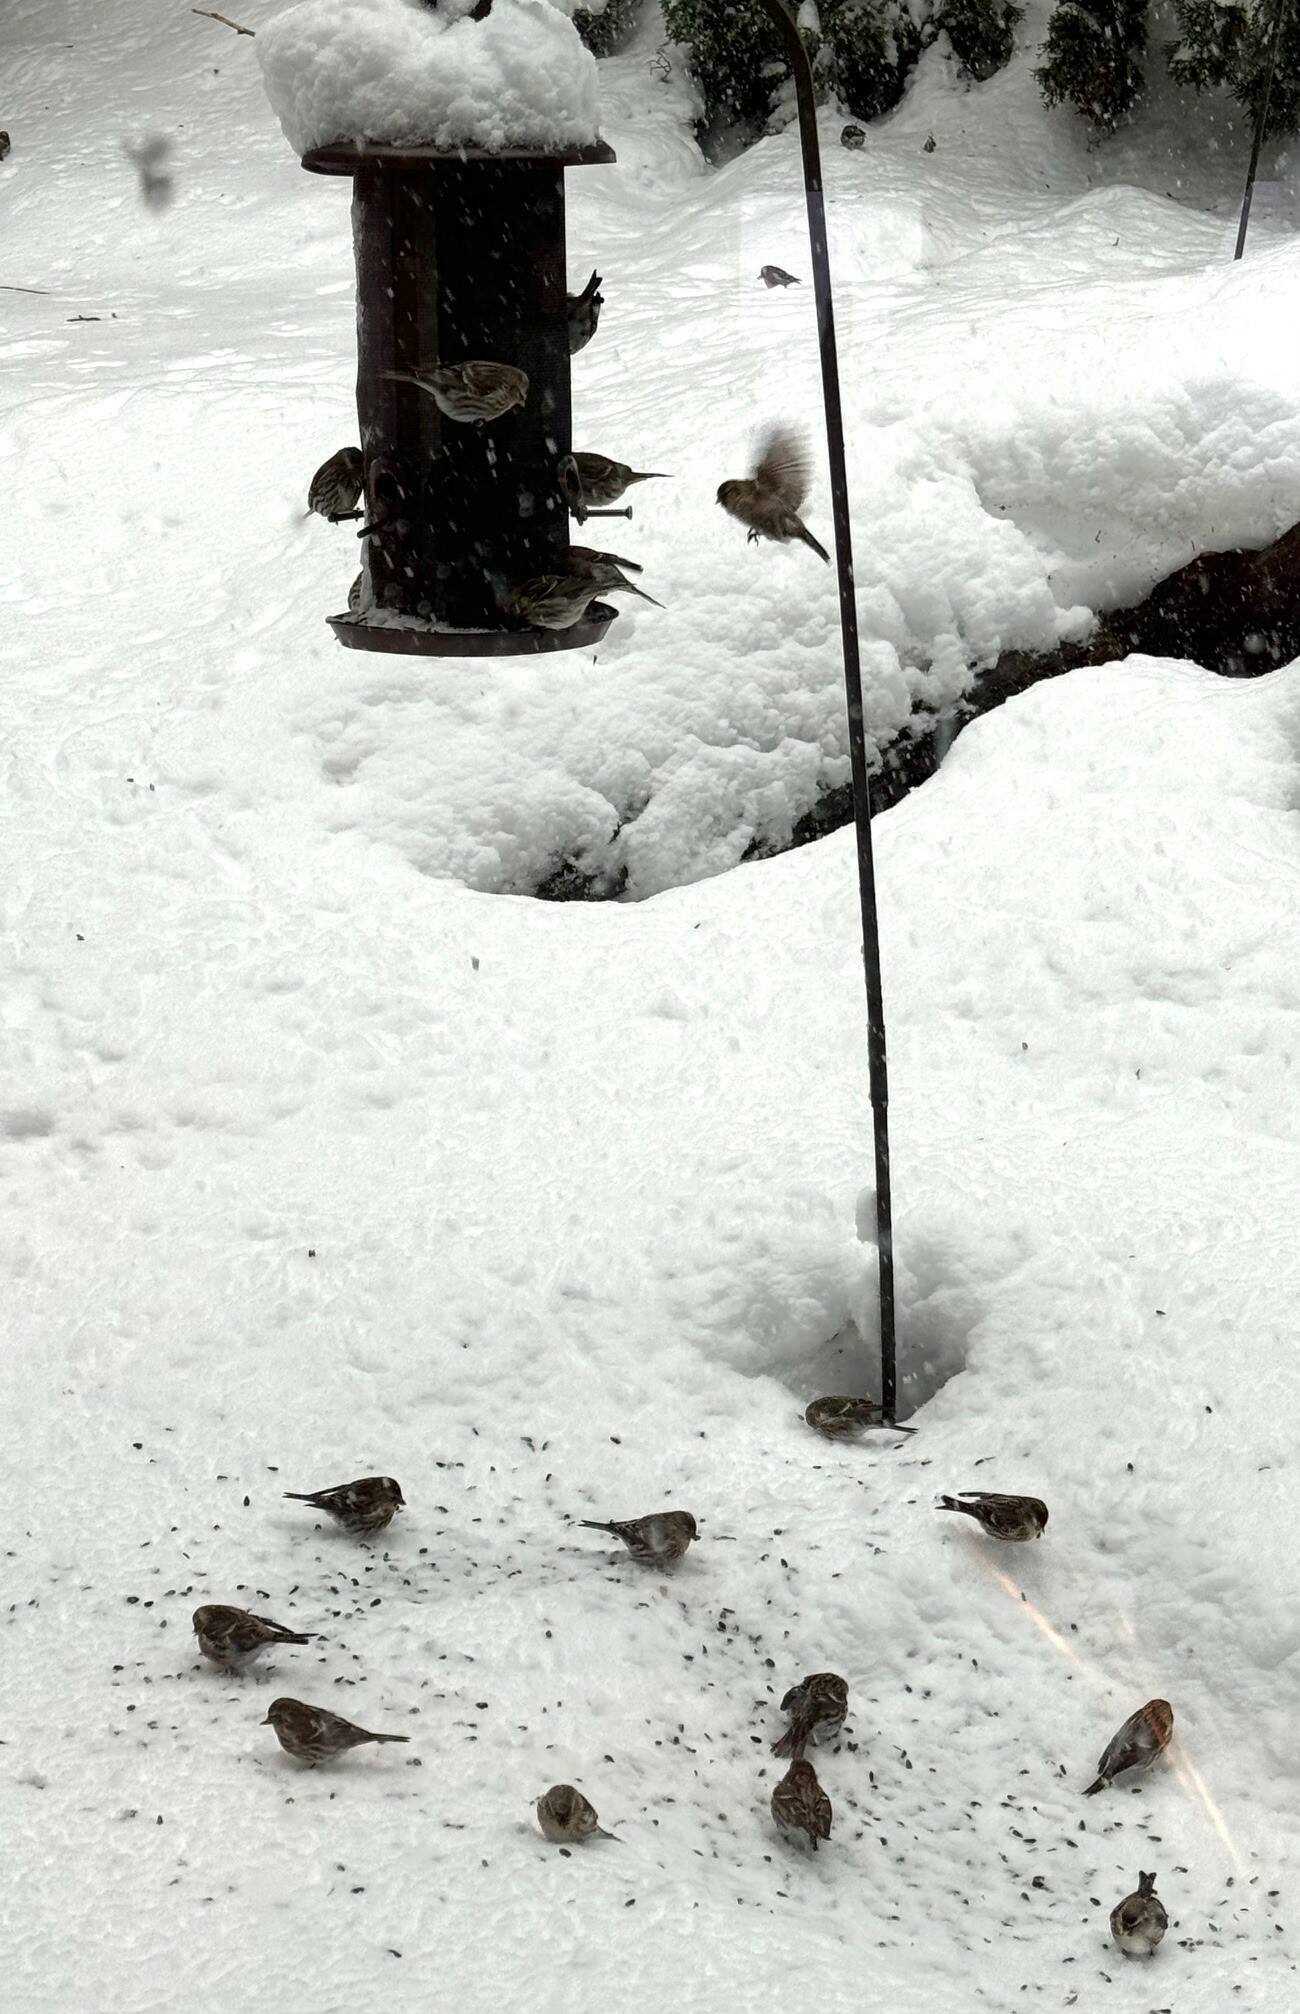 Common redpolls and chestnut-backed chickadees visit a backyard feeder on Feb. 1. (Photo by Denise Carroll)